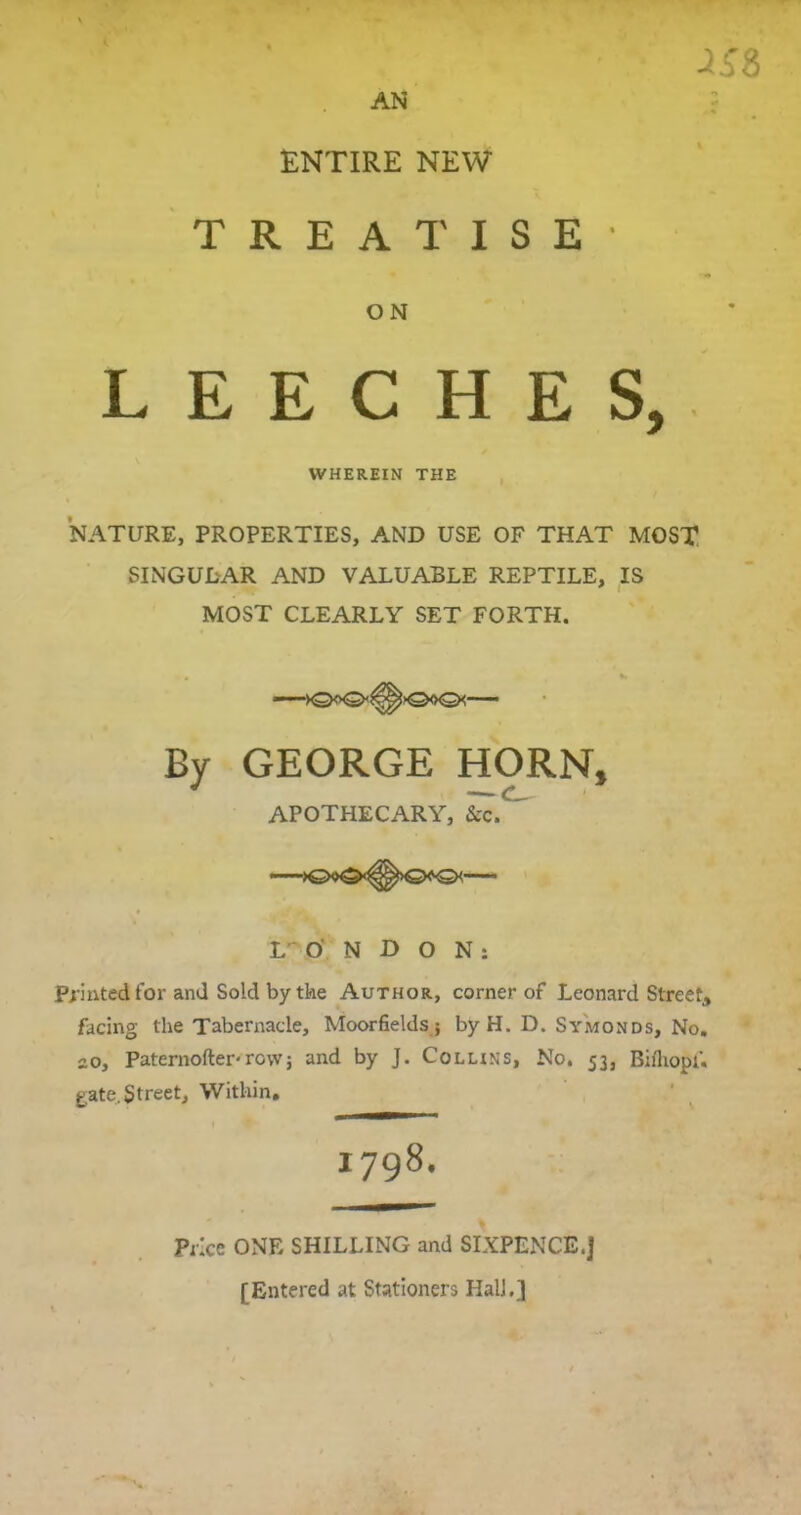 ENTIRE NEW TREATISE 25Z ON LEECHES, WHEREIN THE NATURE, PROPERTIES, AND USE OF THAT MOST SINGULAR AND VALUABLE REPTILE, IS MOST CLEARLY SET FORTH. >0<x2* >©<x2k—■ By GEORGE HORN, APOTHECARY, &c. LONDON: Printed for and Sold by the Author, corner of Leonard Street, facing the Tabernacle, Moor fields; byH. D. Sy'monds, No. 20, Paternofter-row j and by J. Collins, No. 53, Bifliopf. gate. Street, Within. 1798. Price ONE SHILLING and SIXPENCE.] [Entered at Stationers Hall.]